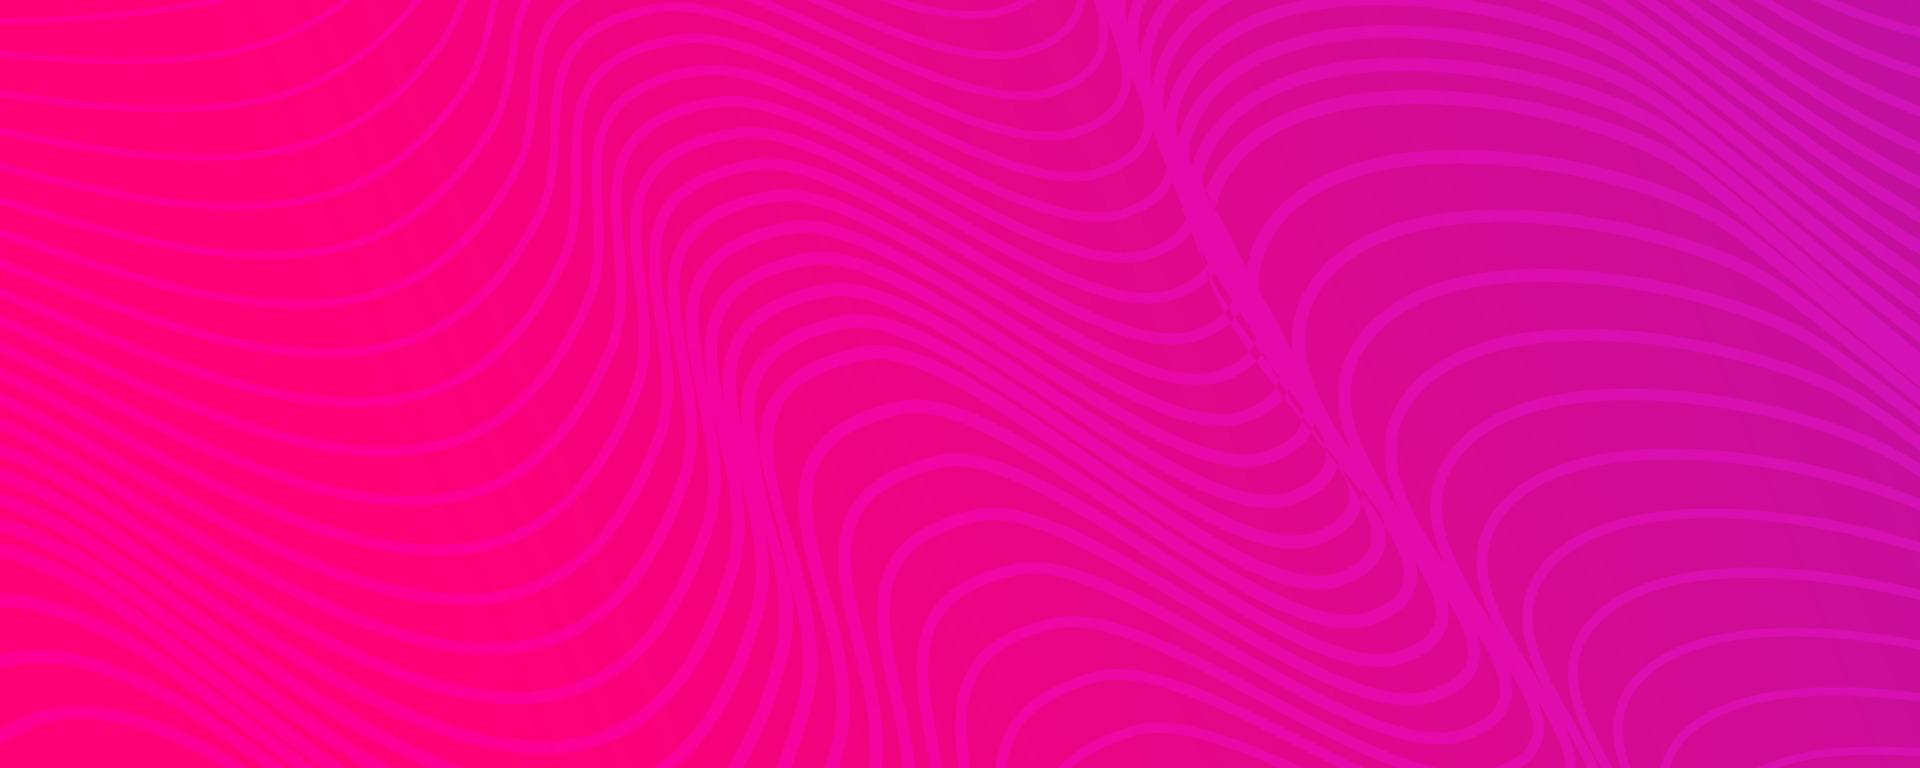 Modern colorful gradient background with wave lines. Pink geometric abstract presentation backdrop. Vector illustration